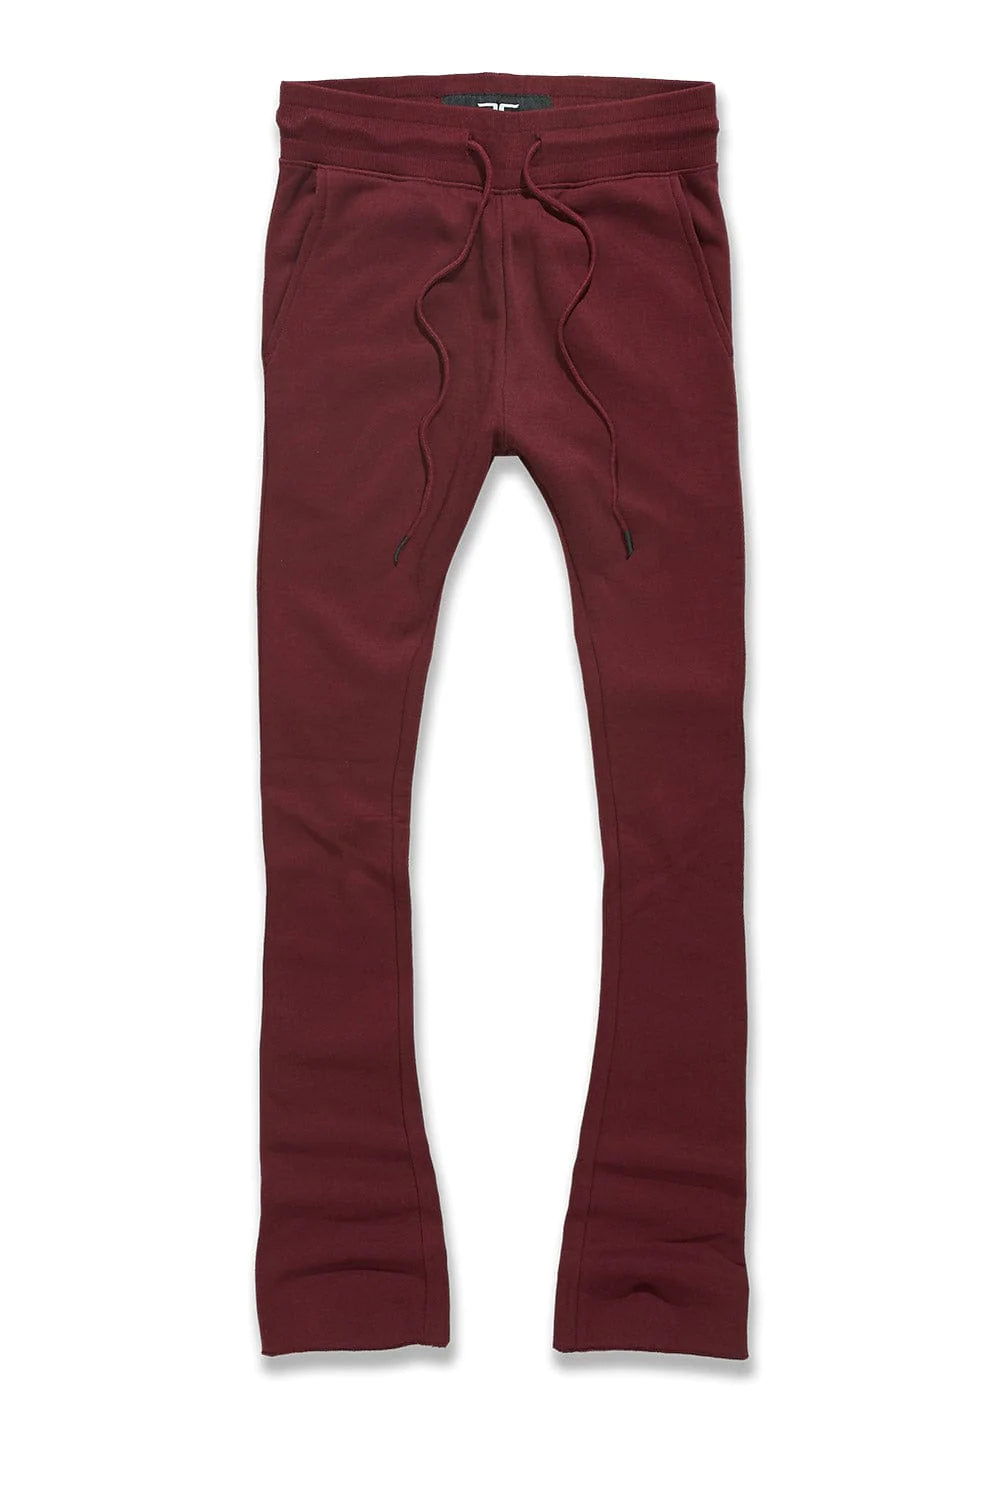 Uptown Stacked Sweatpants - Wine